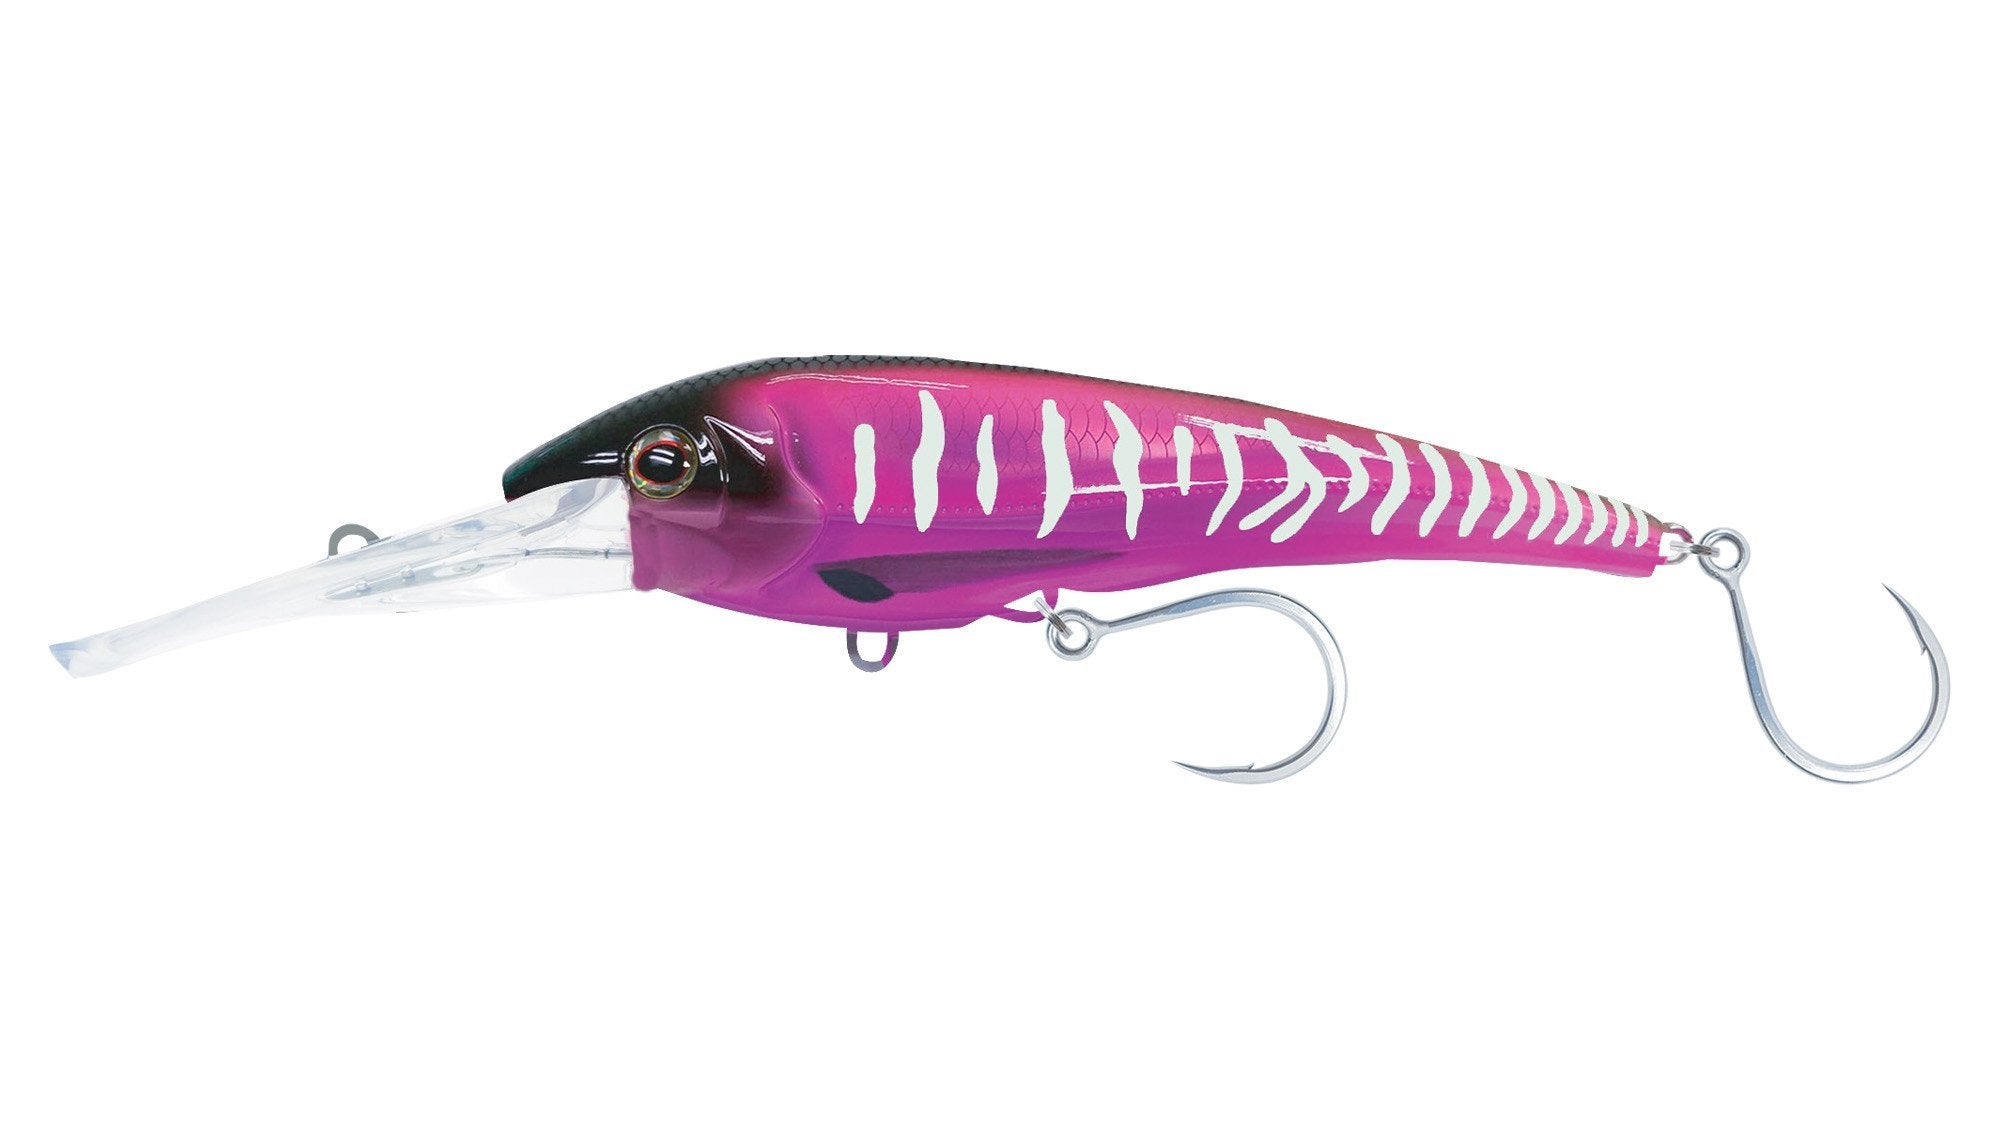 Trolling Lure- Nomad DTX Minnow 200MM/40ft - The Fishermans Hut